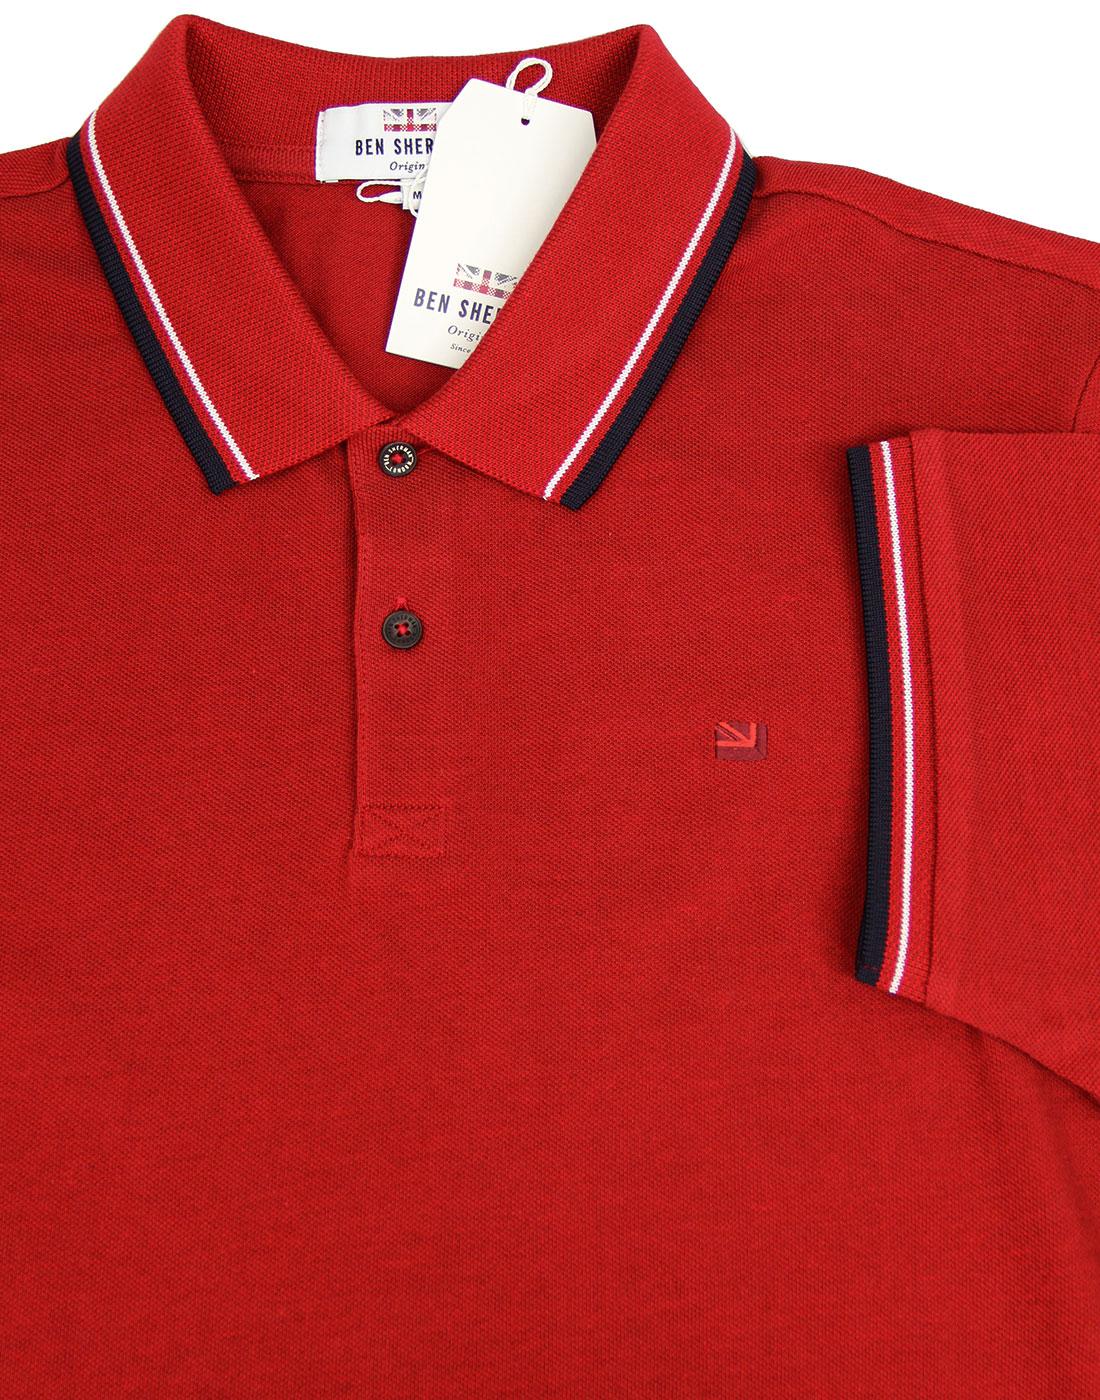 BEN SHERMAN Romford Retro Tipped Pique Polo Top in Red